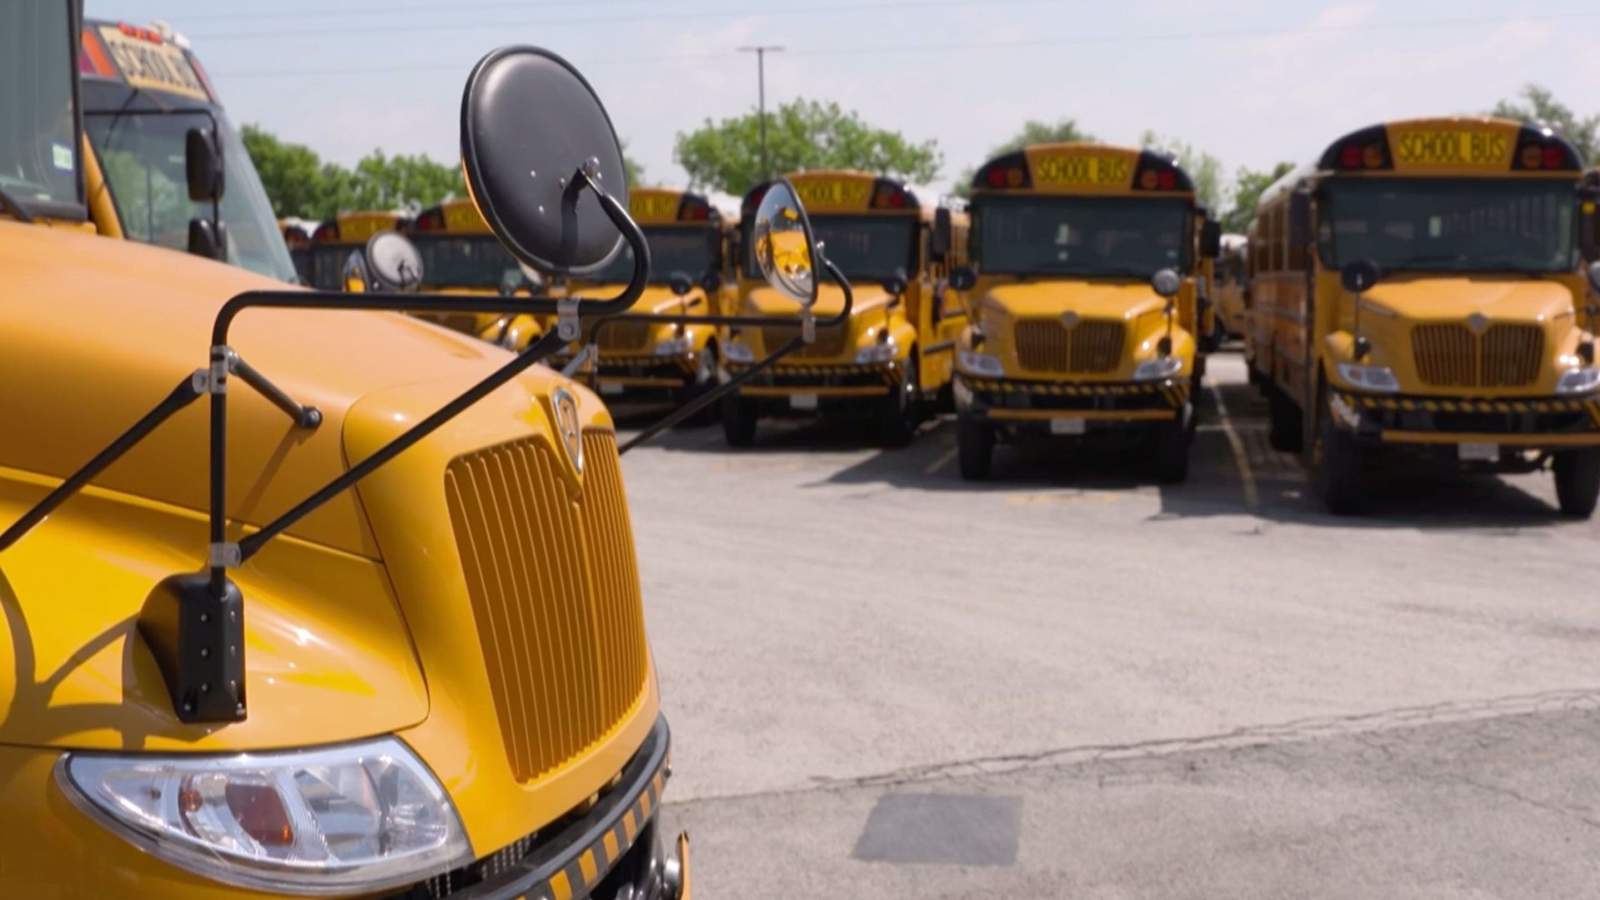 Klein ISD revamps bus cleaning policies during COVID-19 pandemic